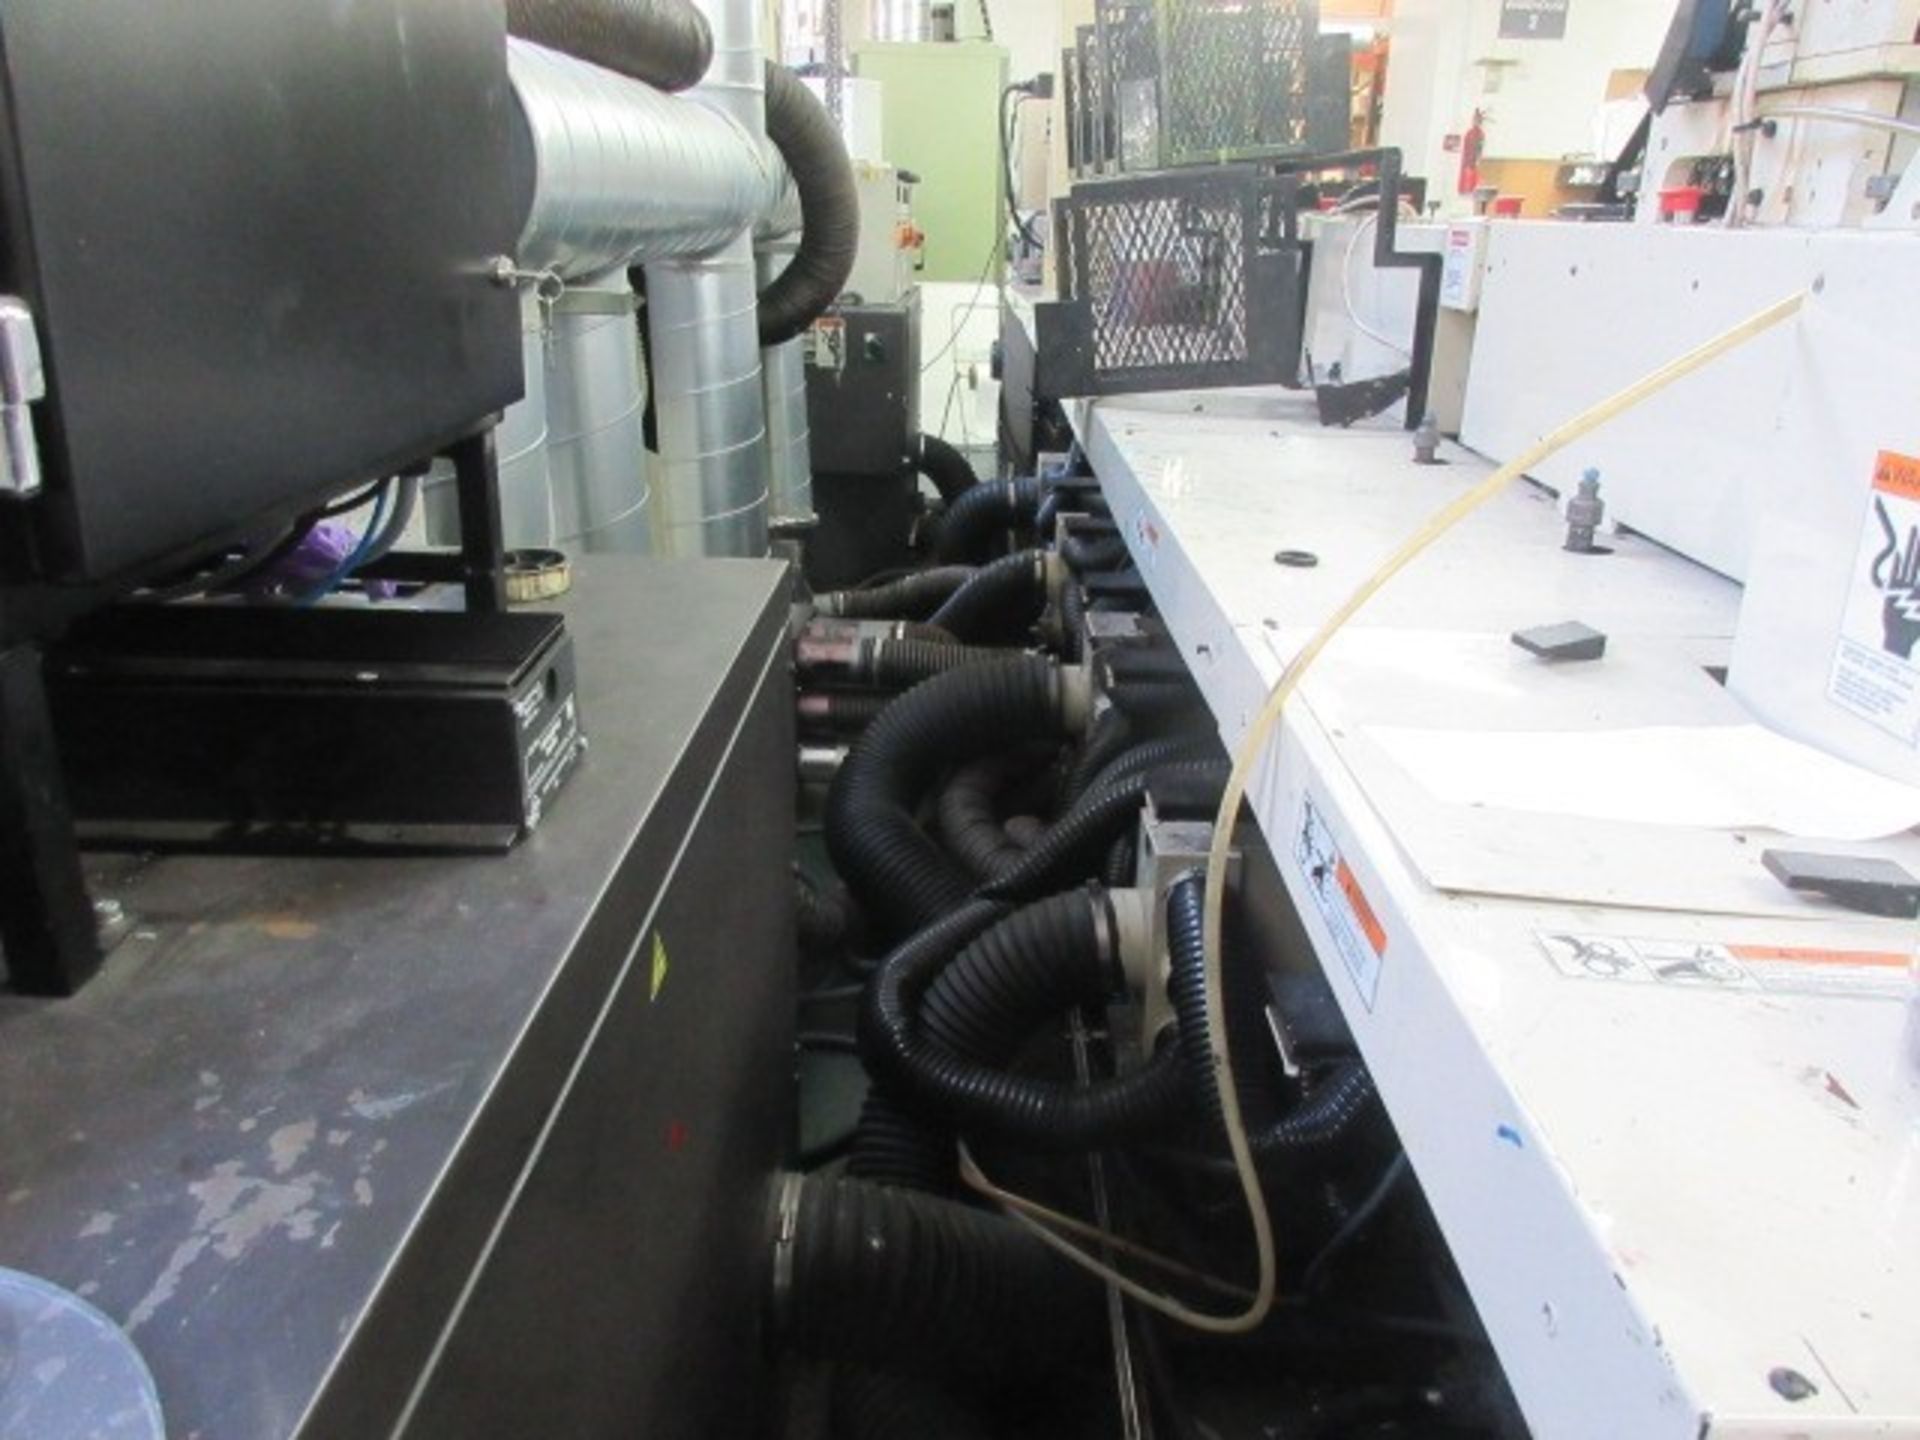 Mark Andy 2200-10F 10” 8 colour flexographic label printing press. Serial no: 1260086 (2002) - Image 258 of 383